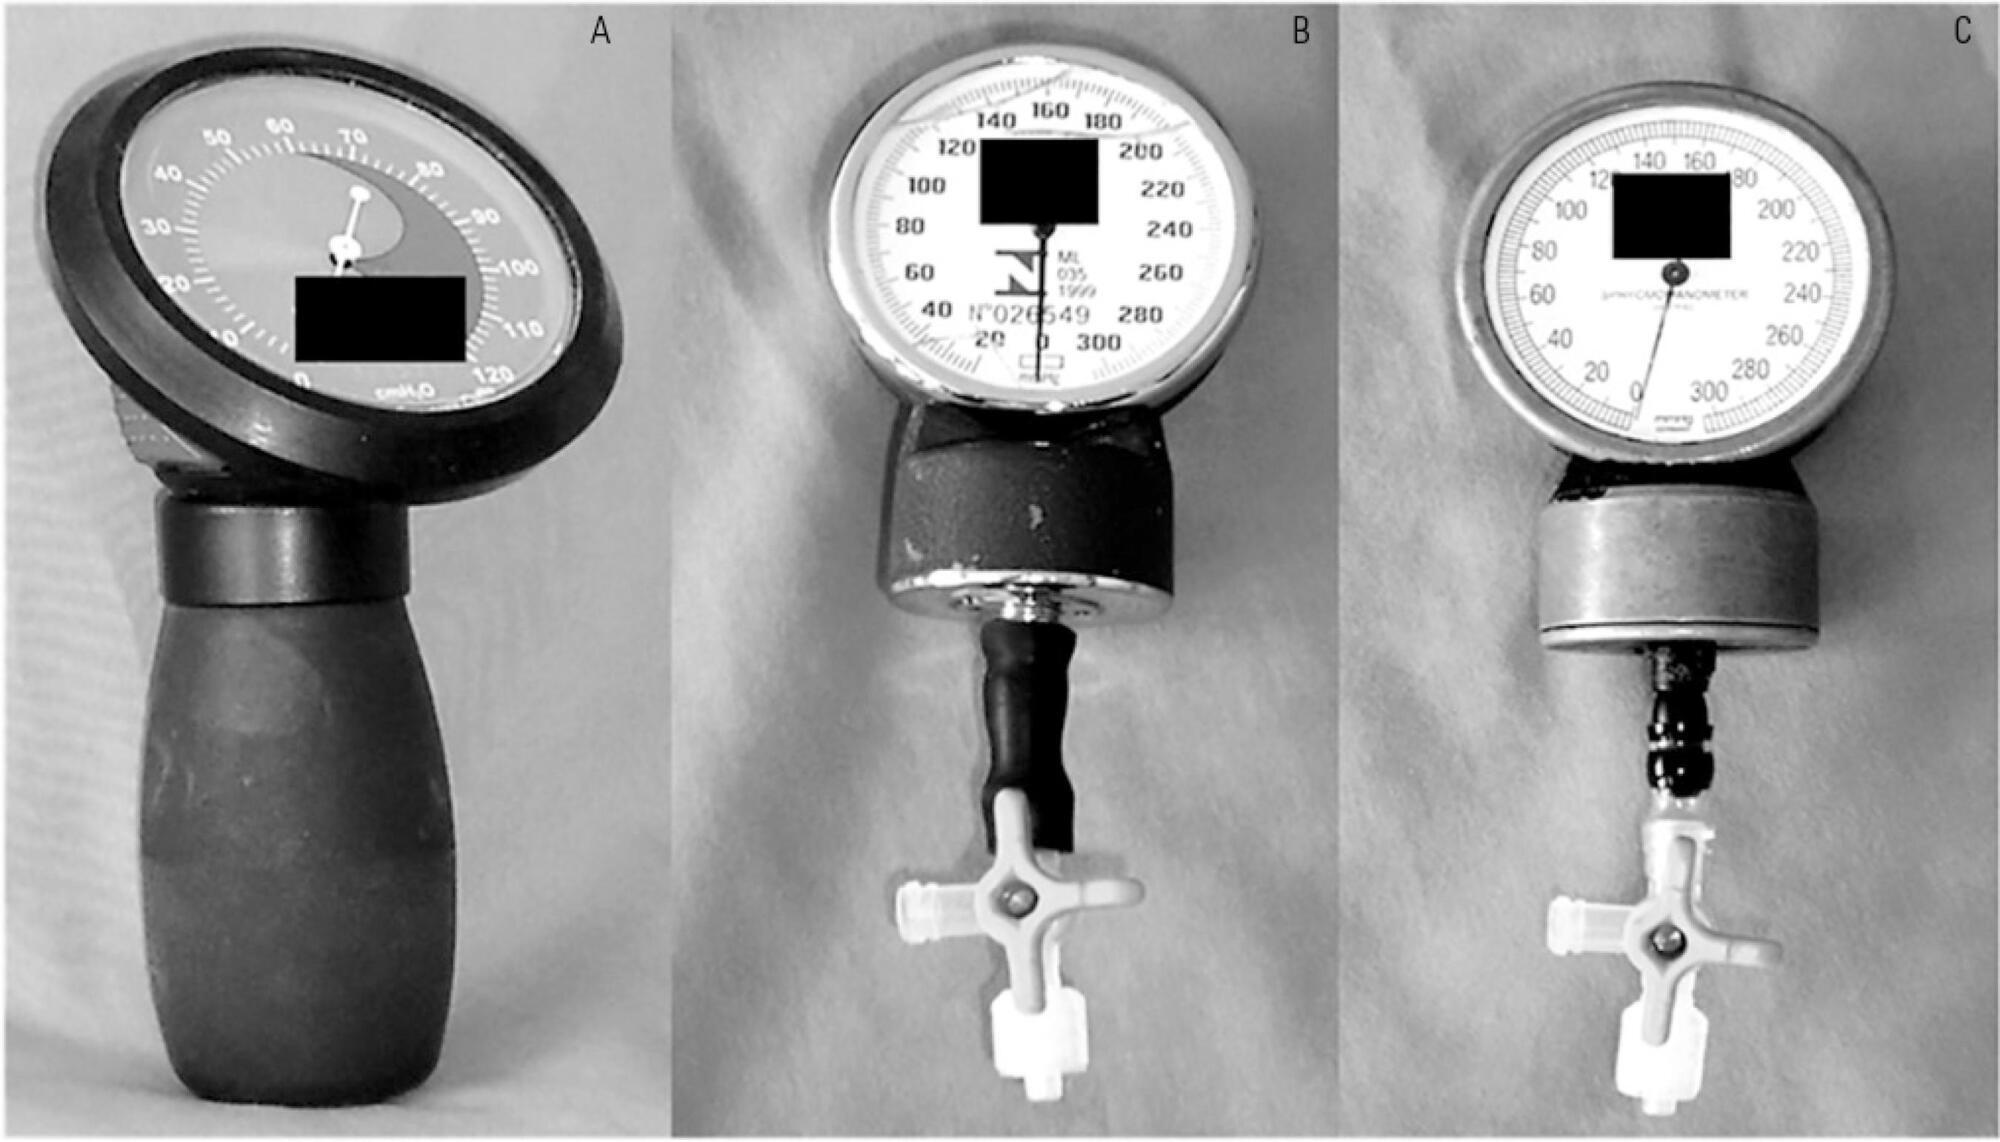 Handcrafted cuff manometers do not accurately measure endotracheal tube cuff pressure